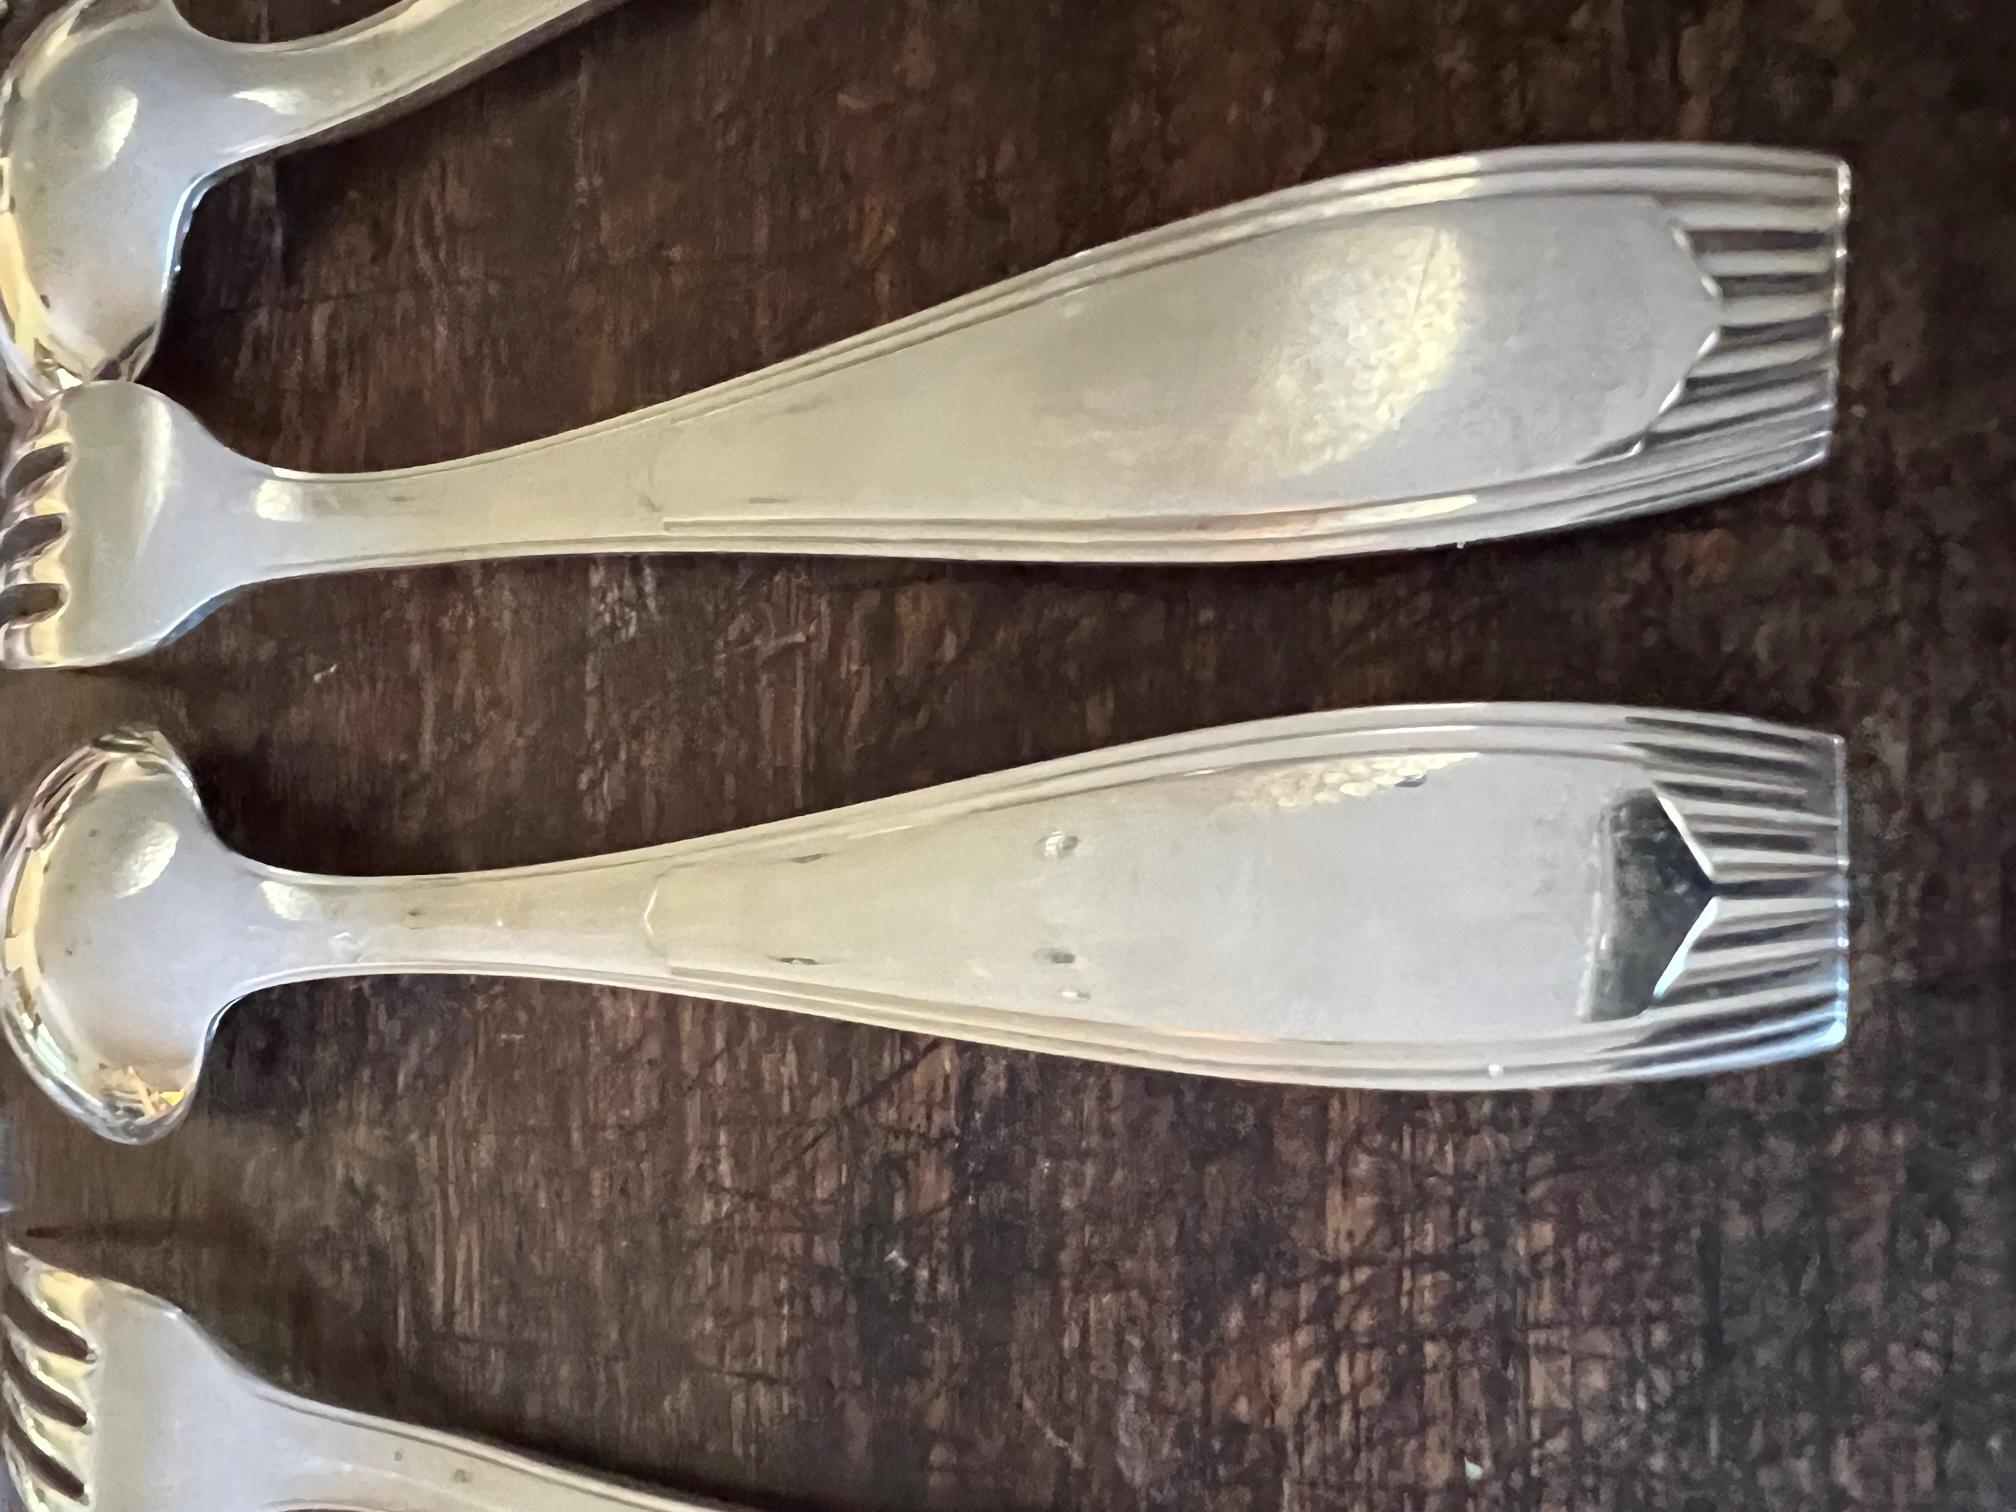 Art Deco style flatware in the Saigon pattern designed by Luc Lanel and made by Christofle around the 1950's in France.

Dinner Fork: 8 inches
Dinner Spoon: 8 inches

Each utensil is stamped with the Christofle hallmark used between 1935 & 1983,  as